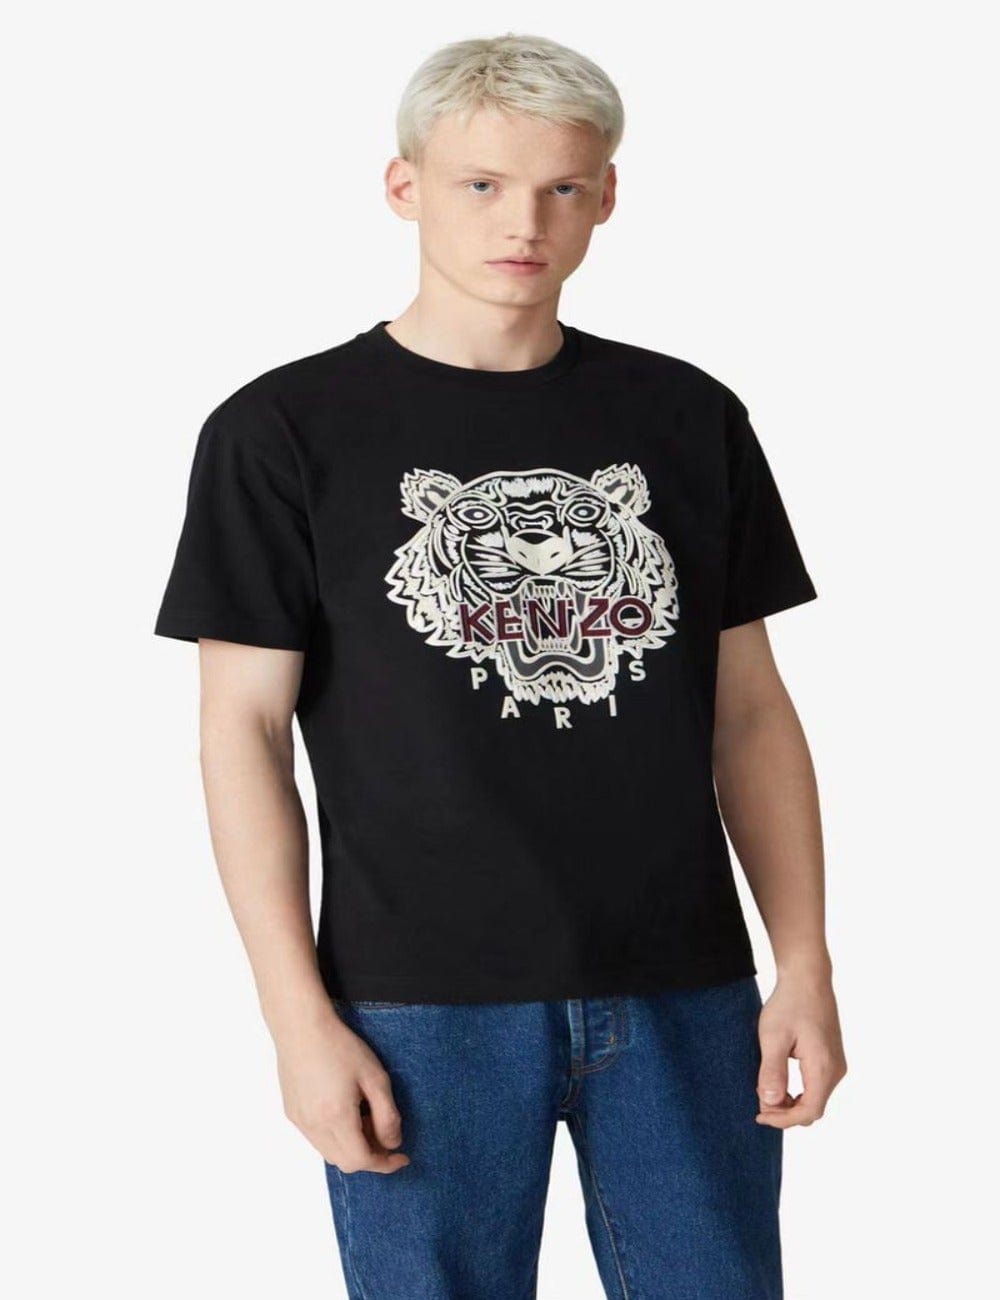 Kenzo Varsity Tiger Embroidered T-shirt - Shop Streetwear, Sneakers, Slippers and Gifts online | Malaysia - The Factory KL